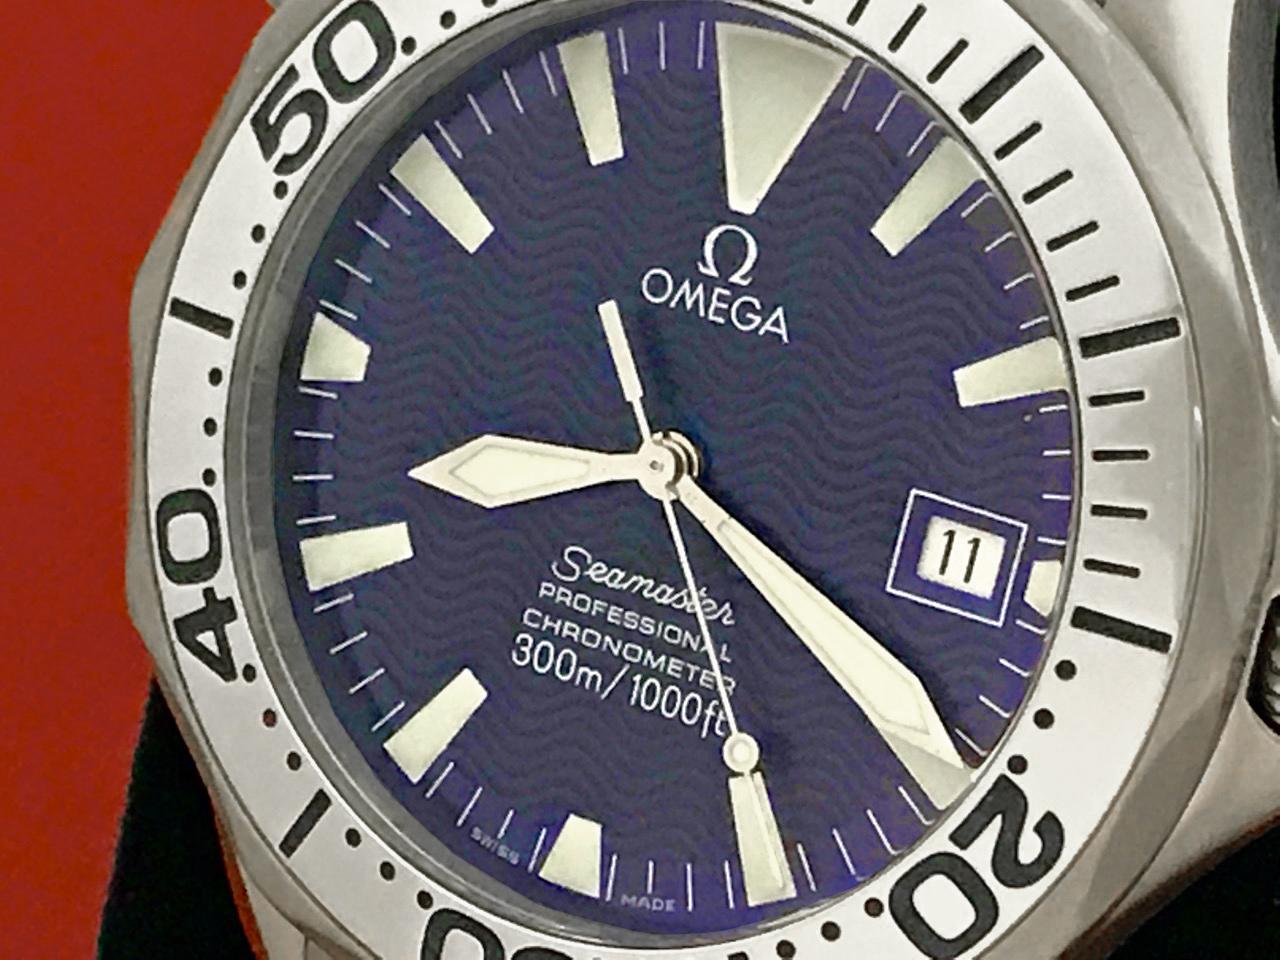 As New Omega Mens Seamaster Professional, Model 2231.80.  Titanium round style case with helium release valve and rotating bezel (41mm dia.). Titanium Omega Seamaster bracelet.  Blue wave Dial with luminous hour markers. Certified Pre Owned and